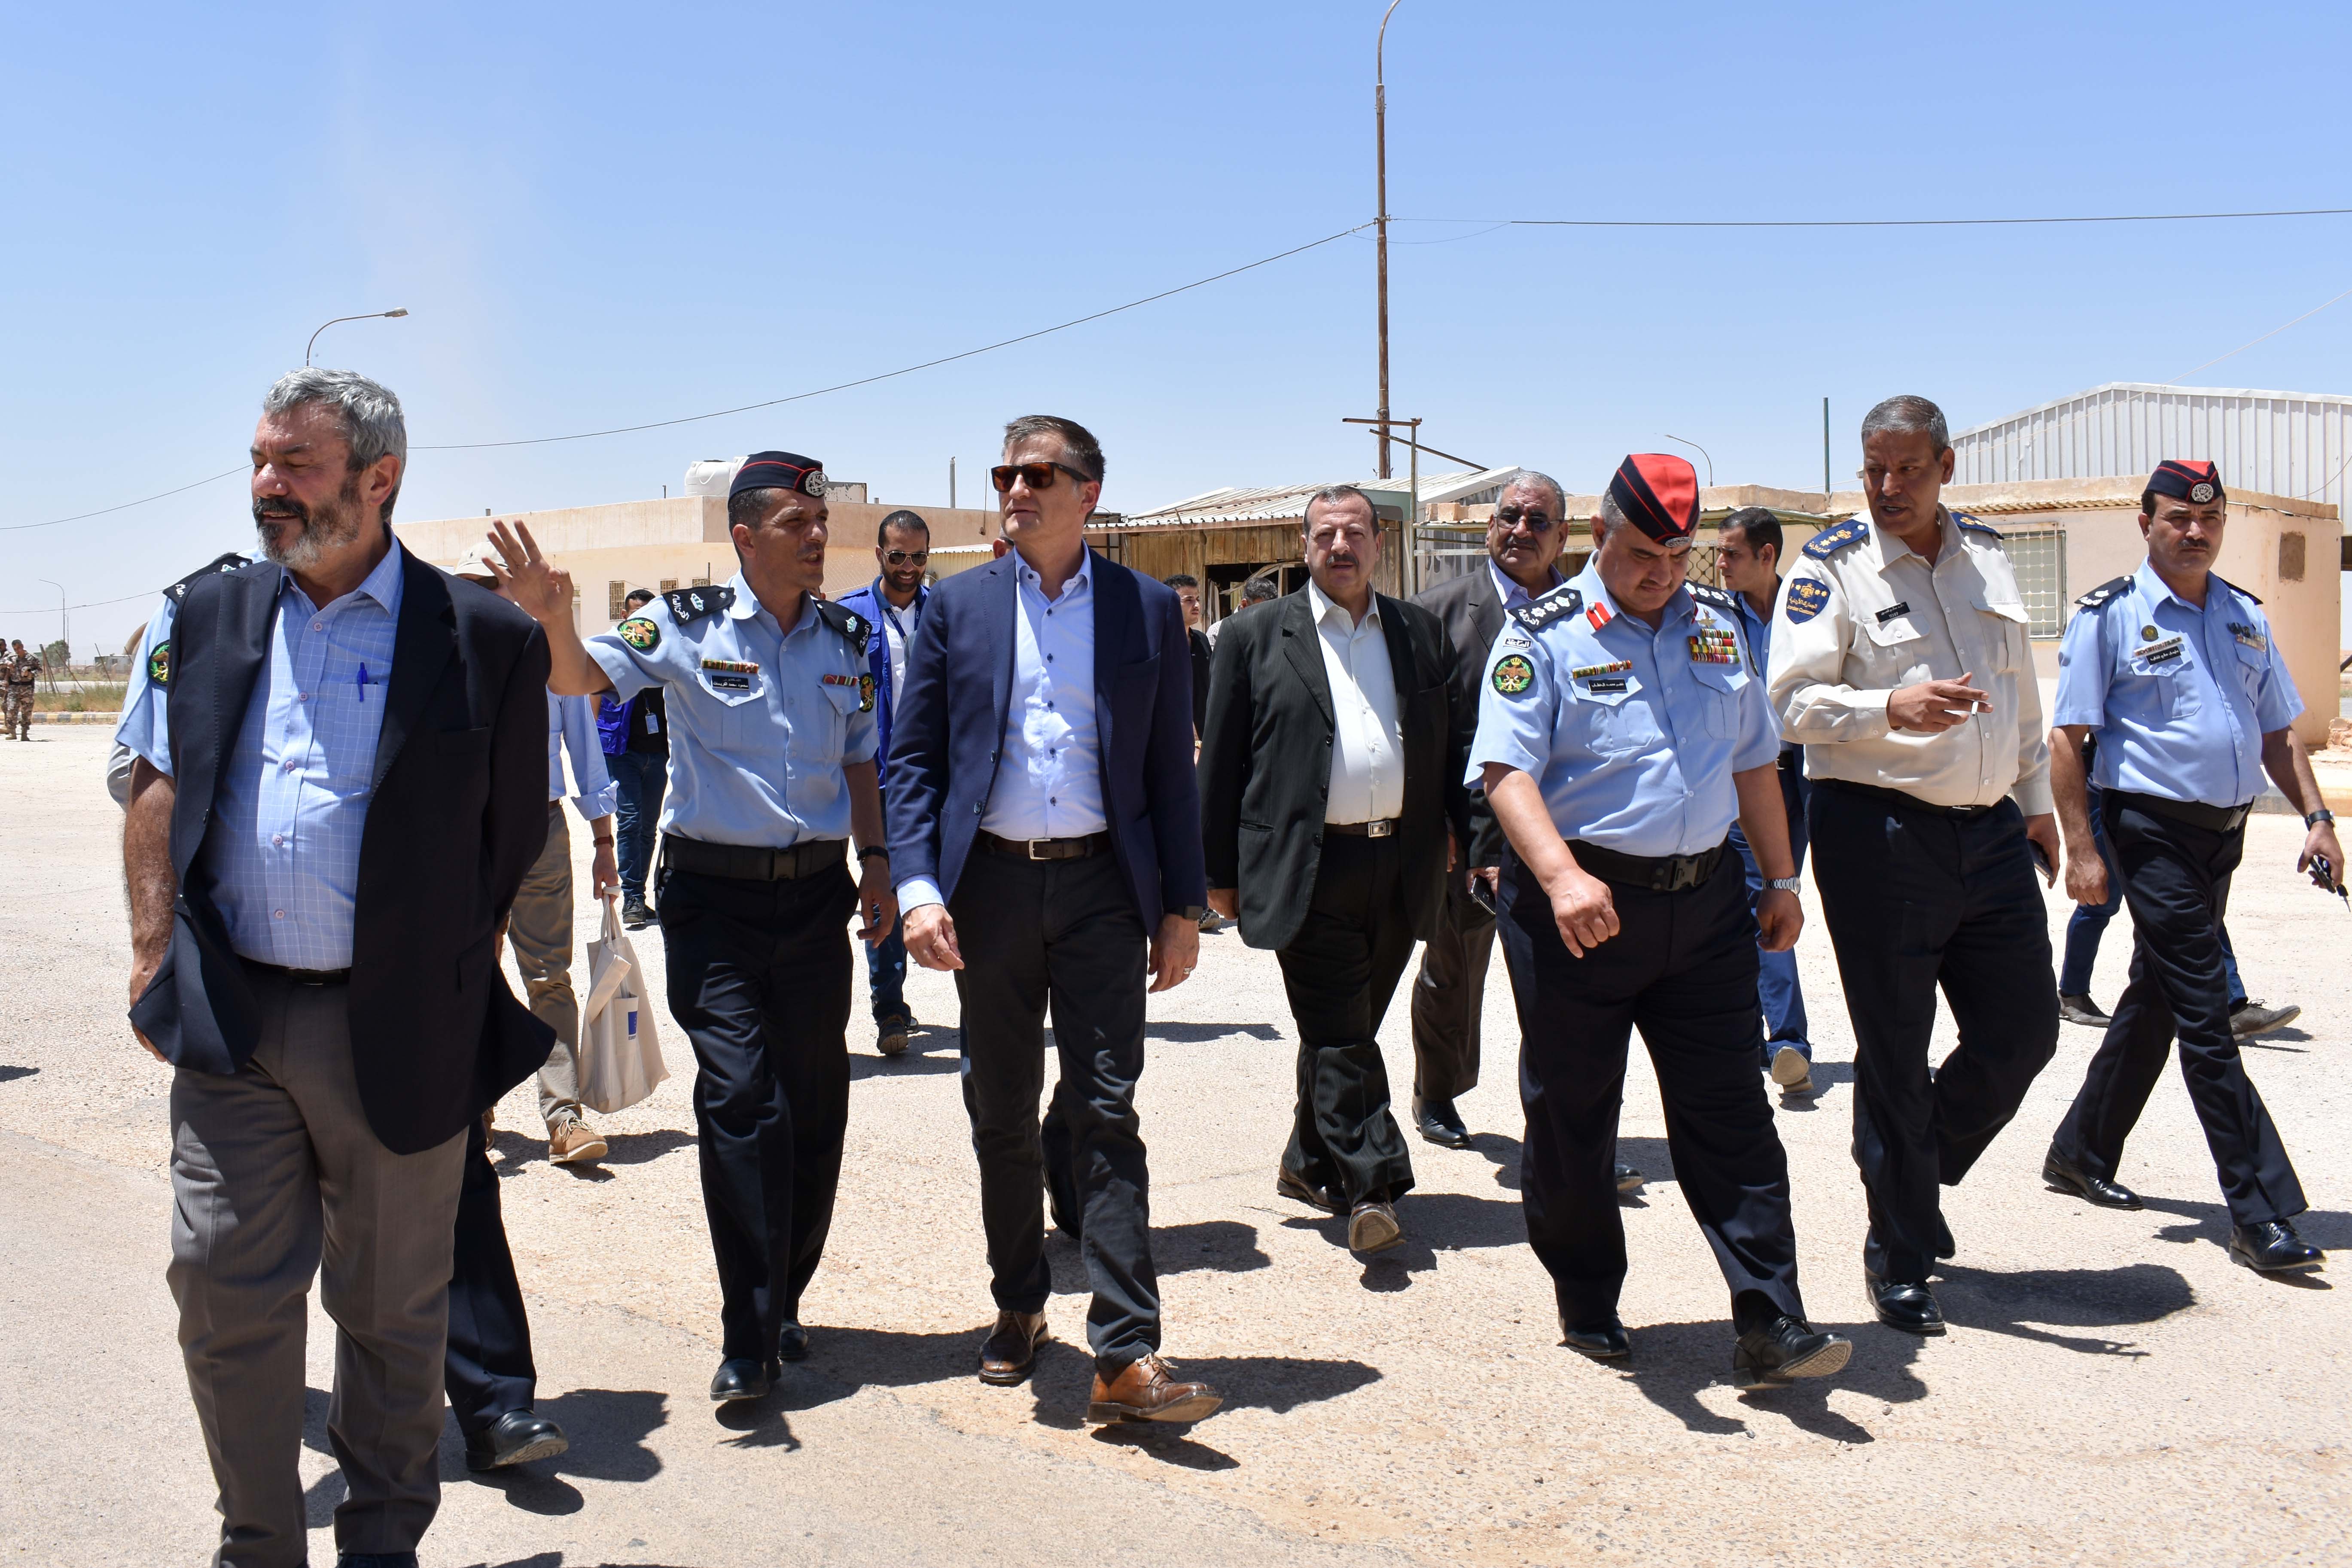 Officials visiting the border crossing point of Karamah, the only commercial and passenger passage between Jordan and Iraq.